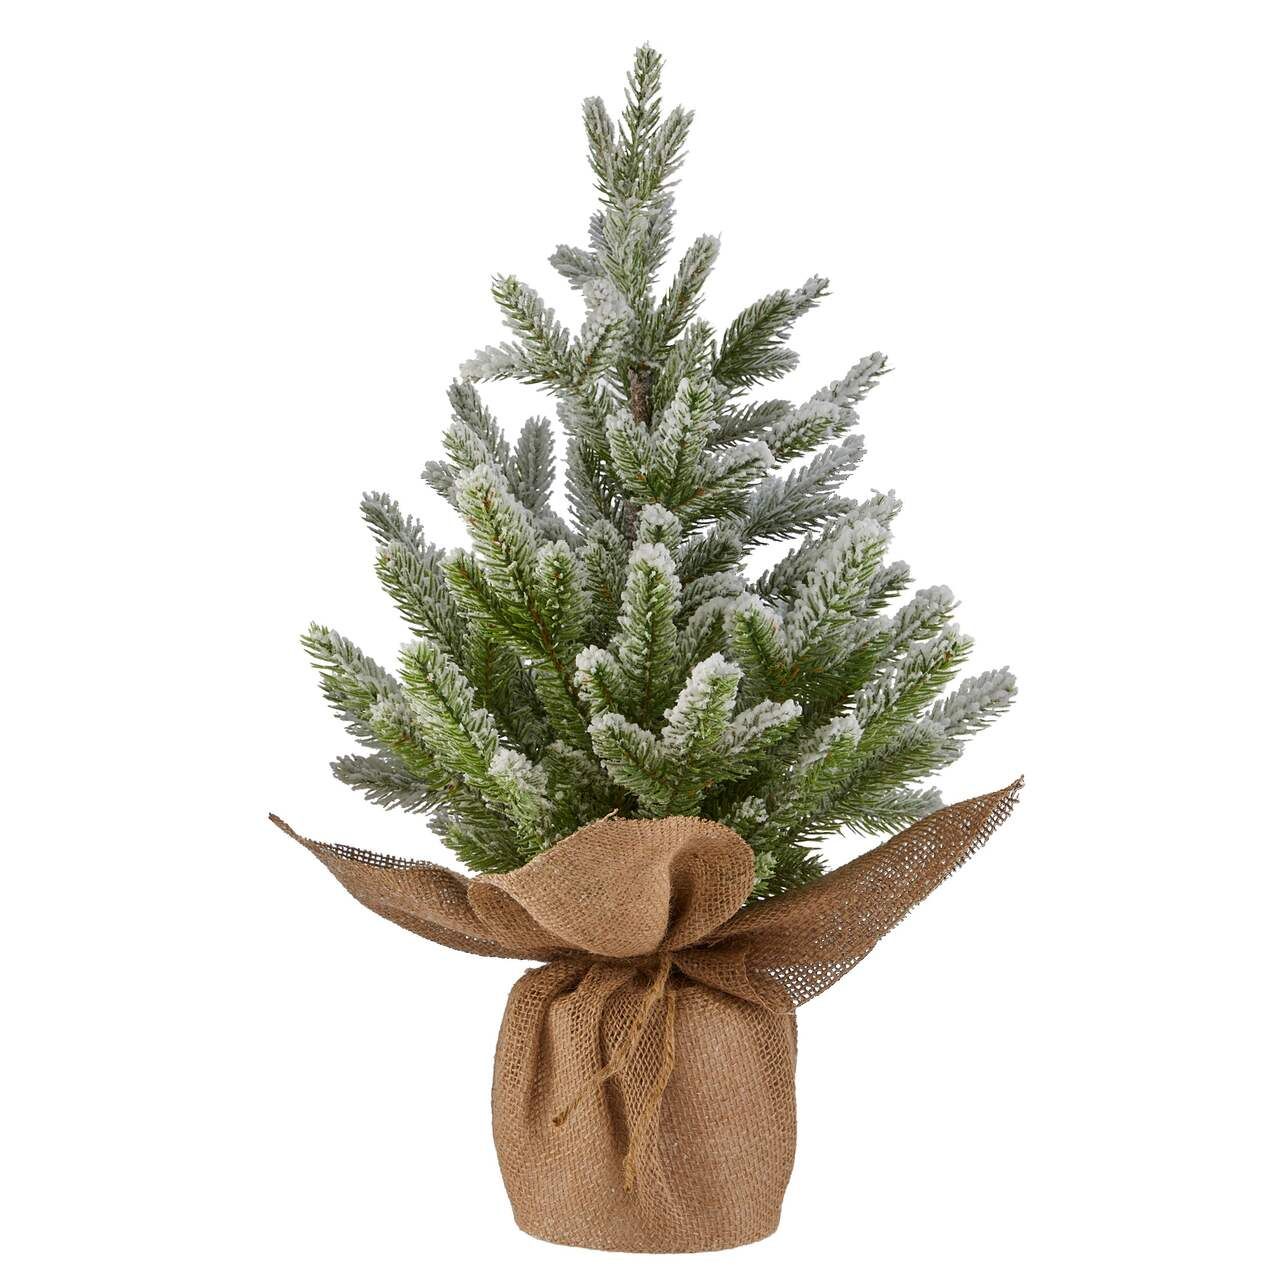 CANVAS Frosted Flocked Christmas Decoration Artificial Table Top Tree in Burlap Sac, 20-in | Canadian Tire